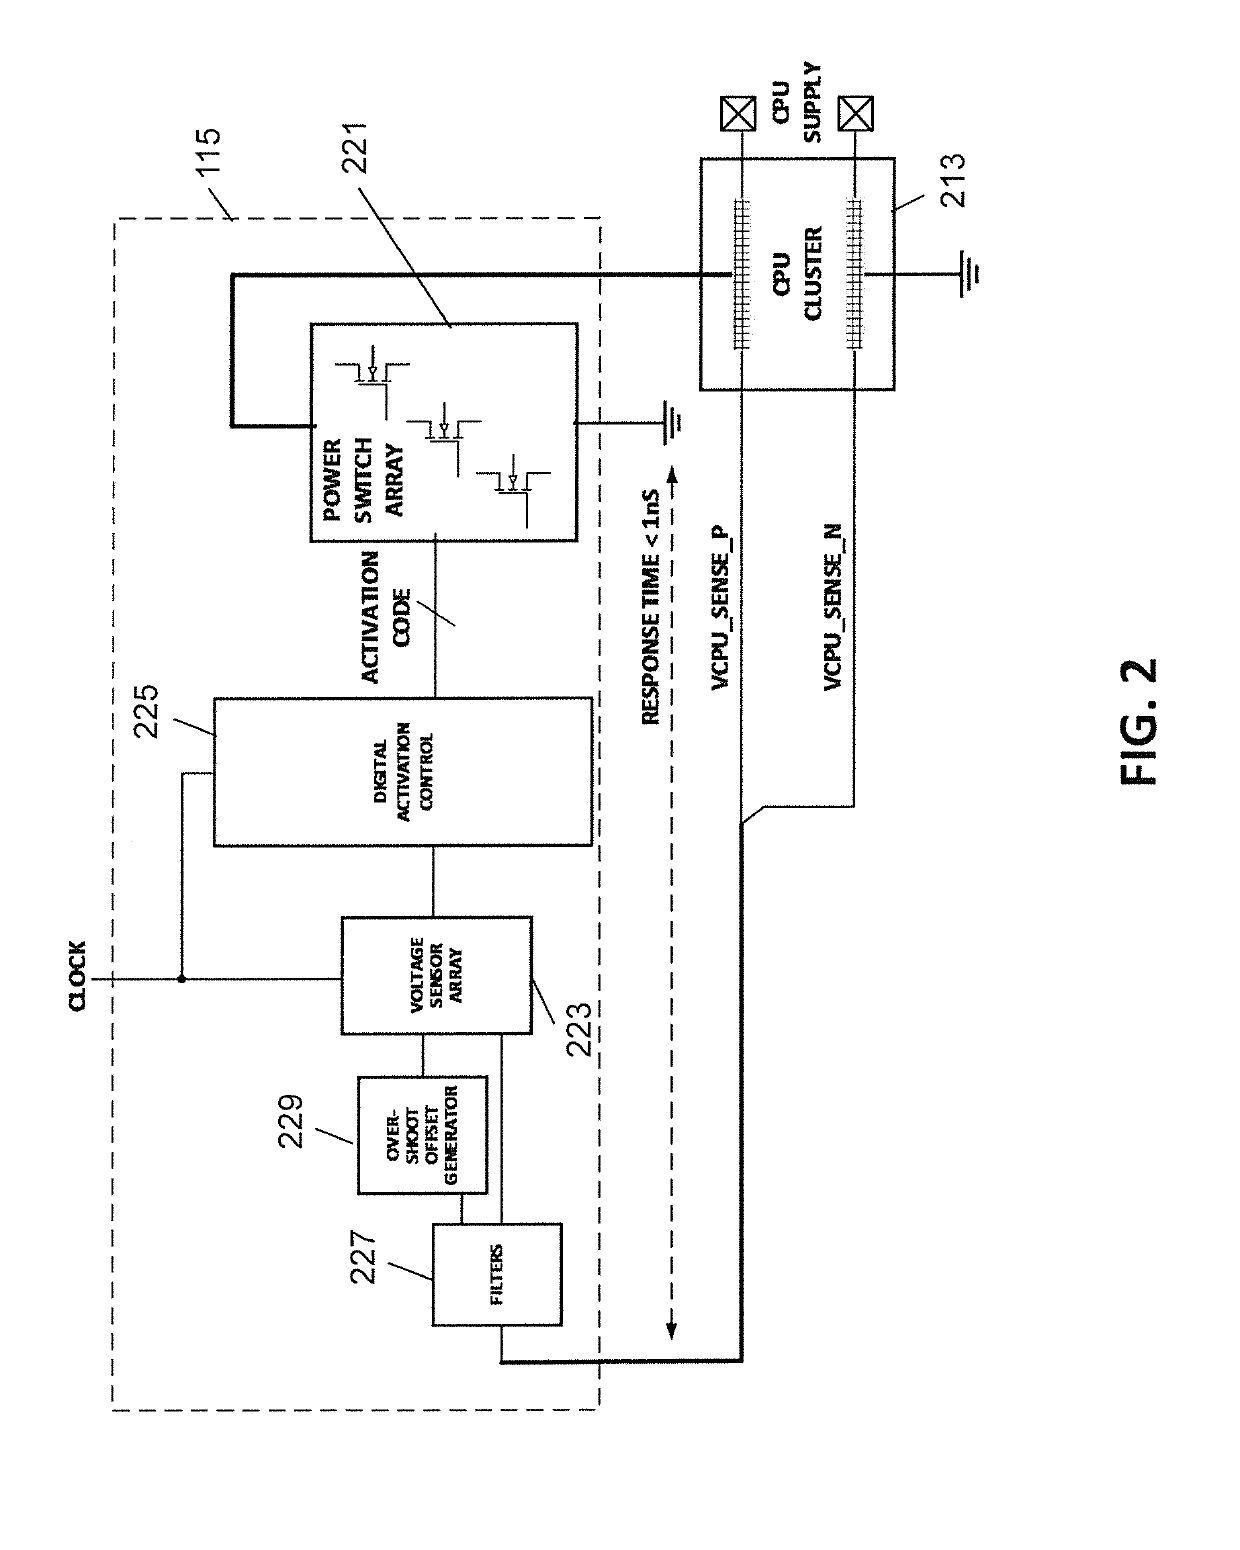 Method and apparatus for improving integrity of processor voltage supply with overshoot mitigation and support for dvfs